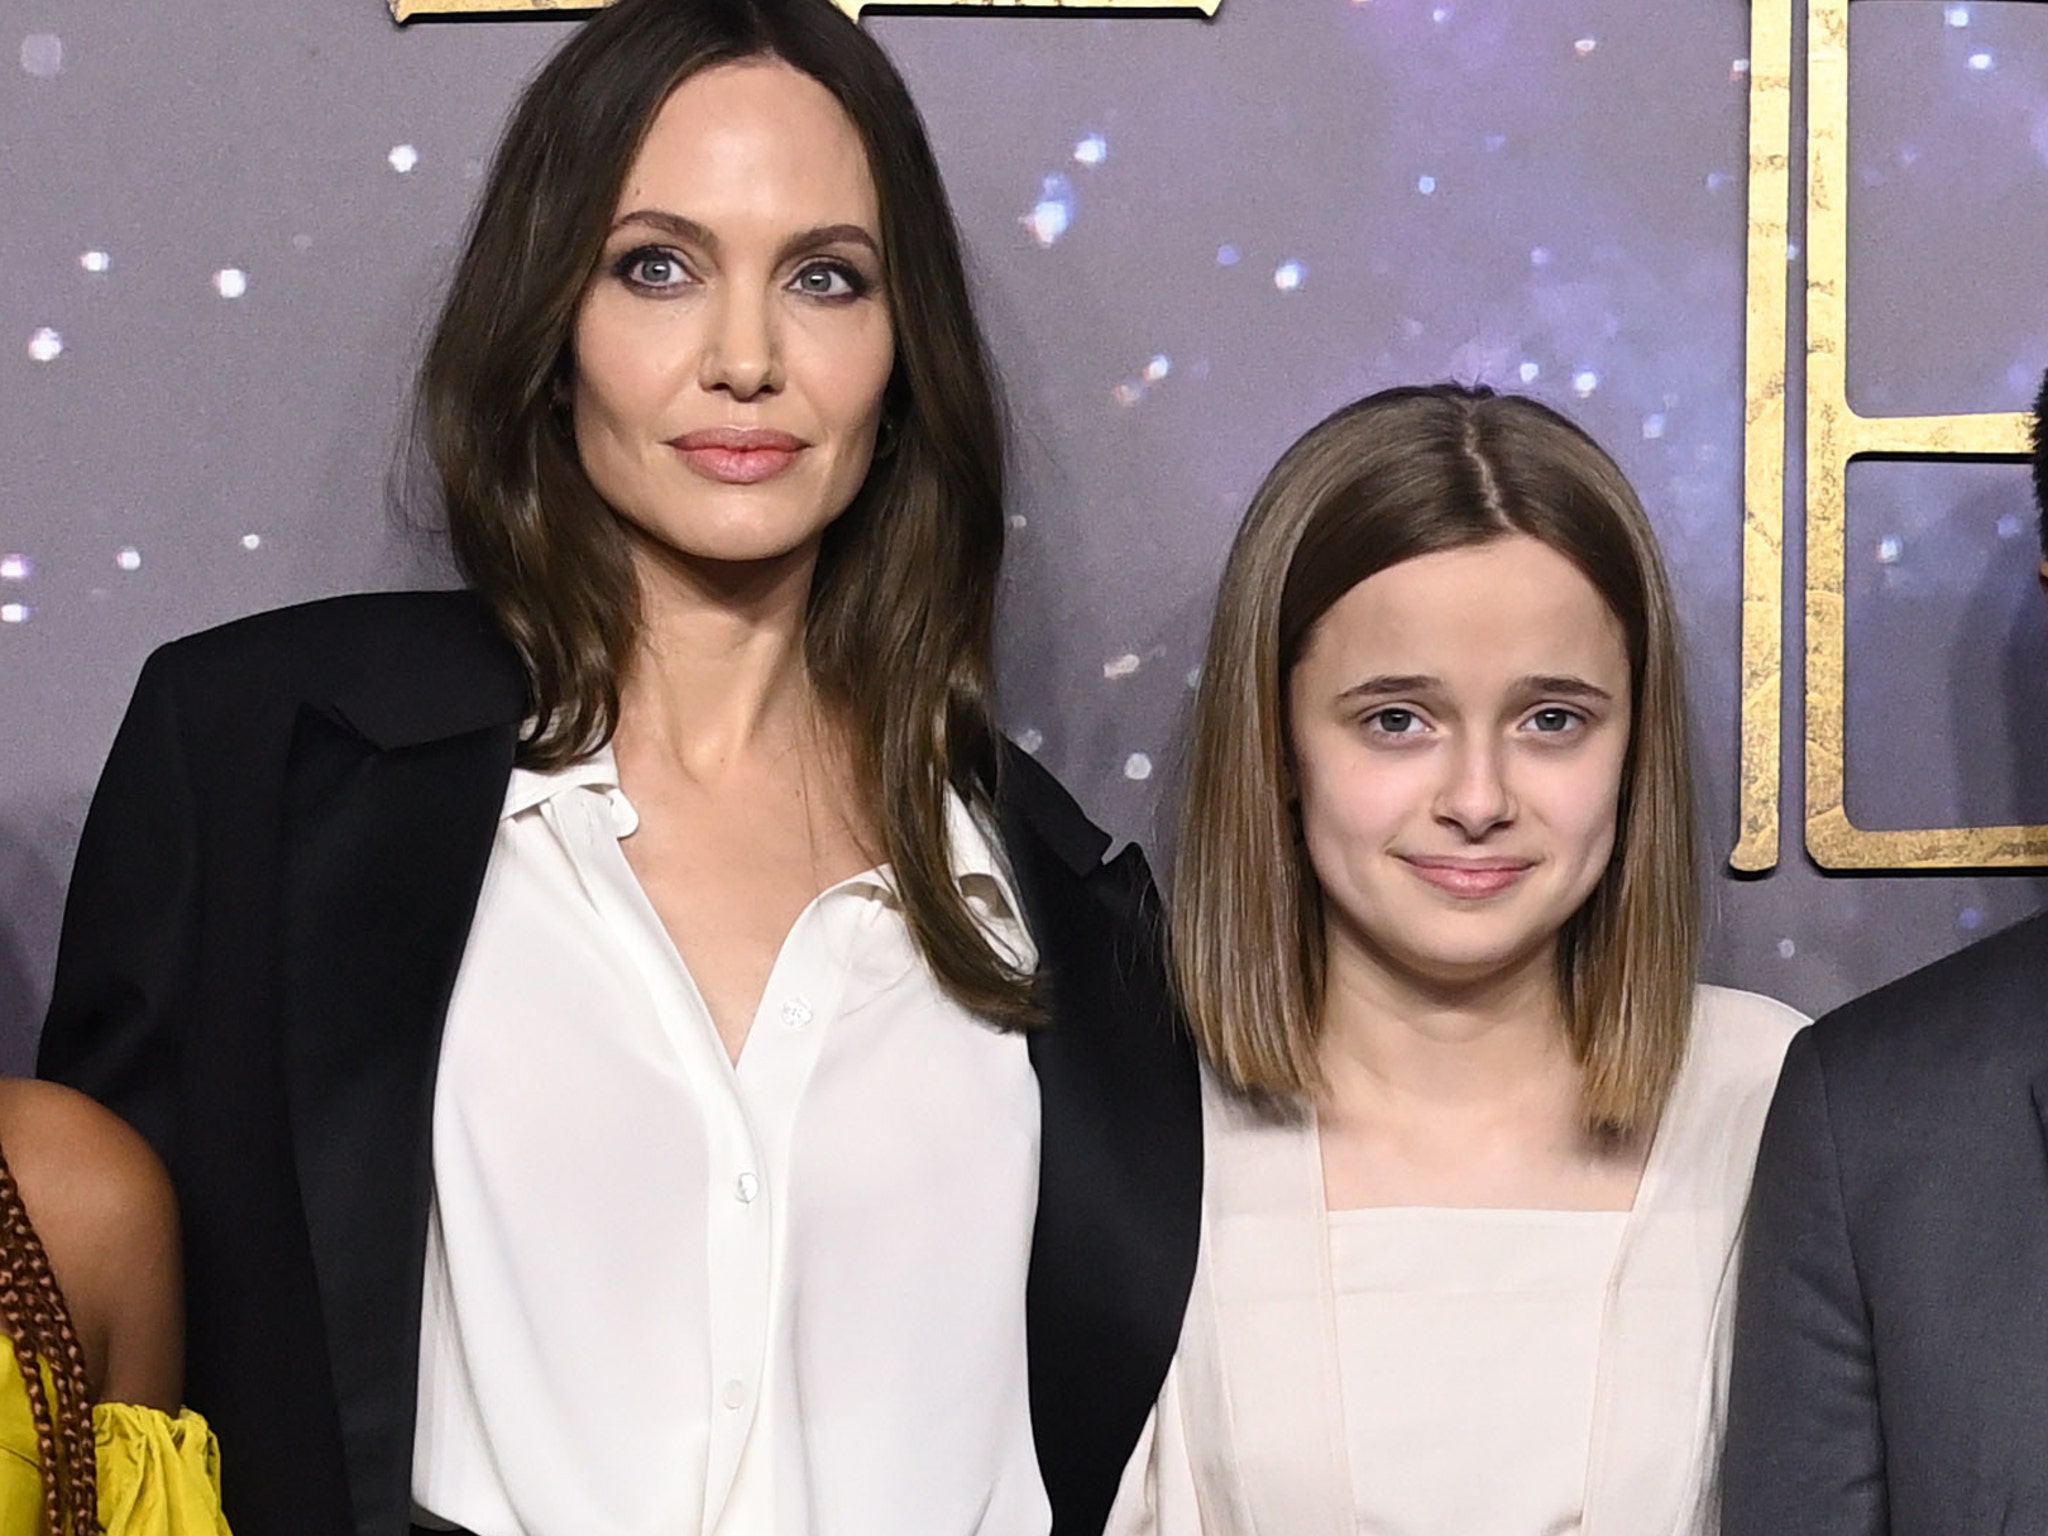 Angelina Jolie shares rare photo of daughter Shiloh, 15, as fans